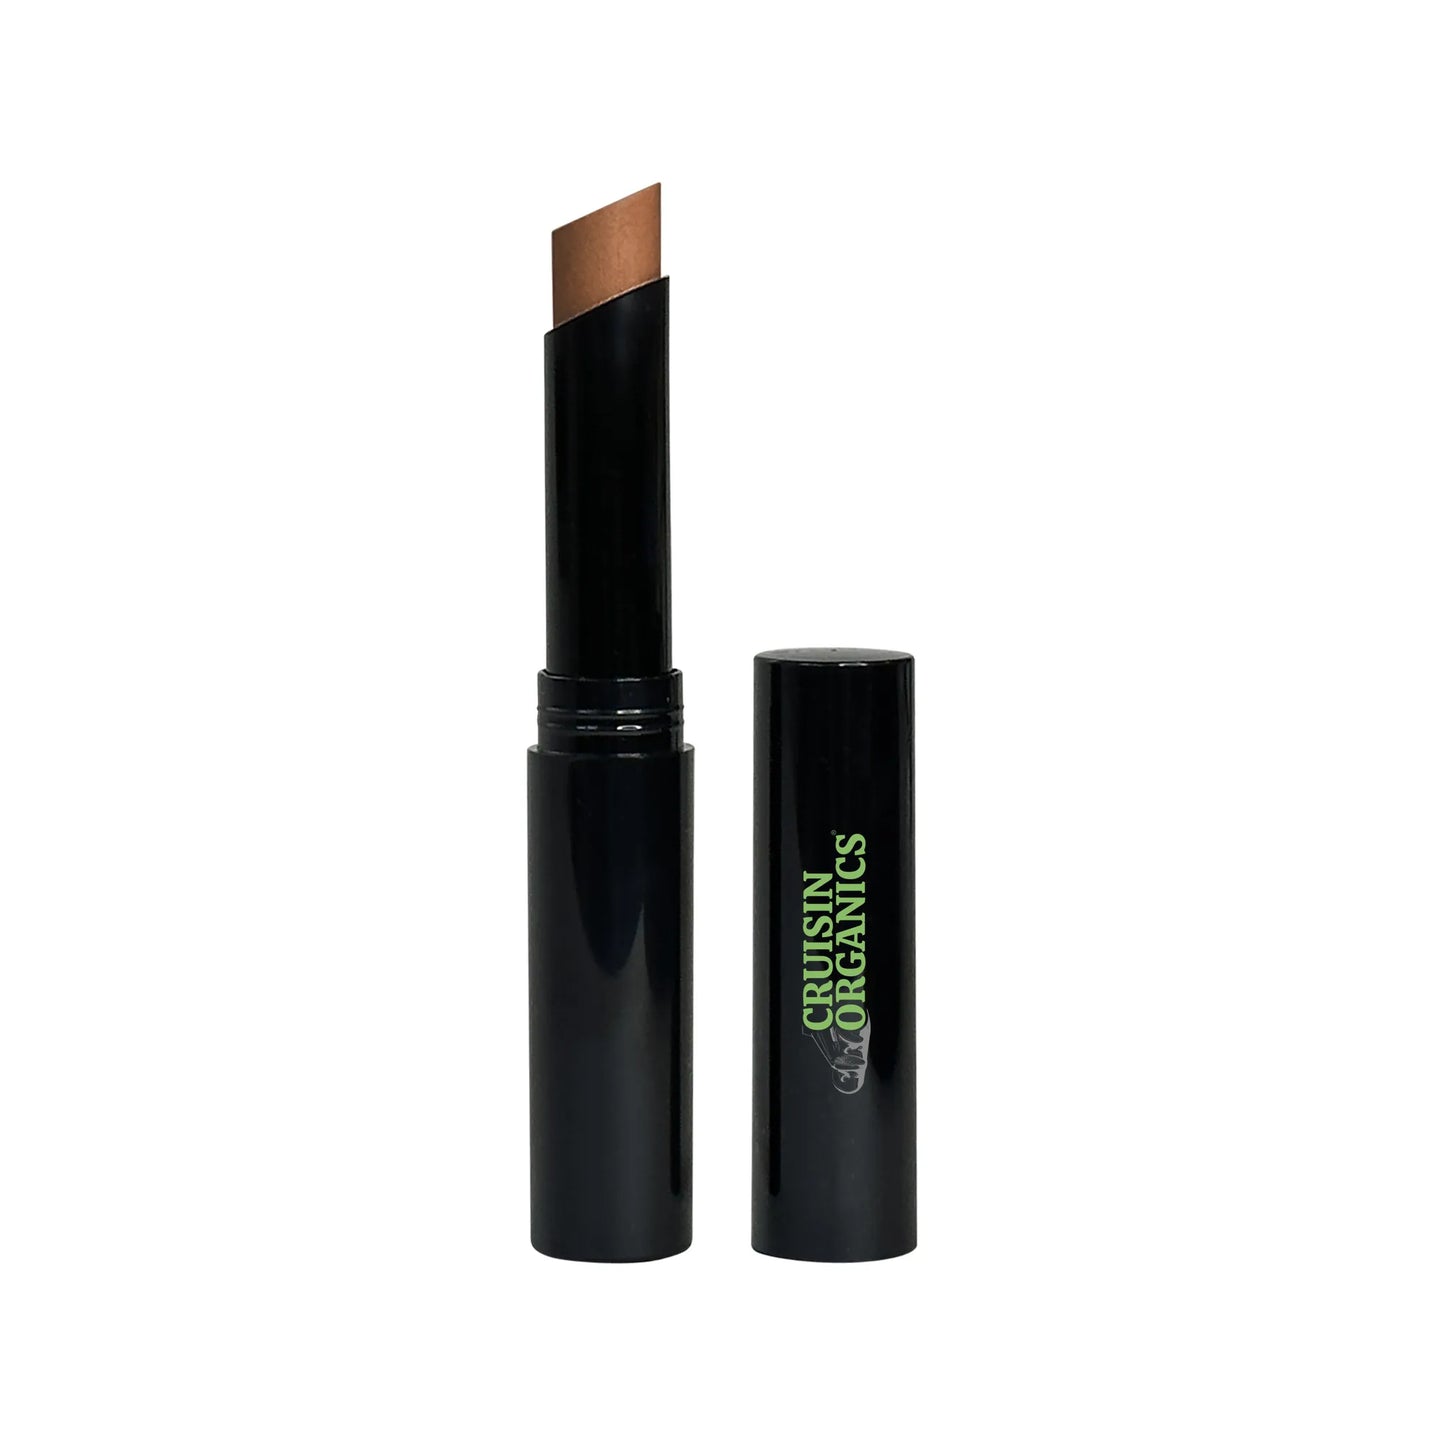 Conceal the dark spots over time for visibly brighter skin with this easy to use compact travel companionship. Cruisin Organics Oak Creme Concealer Stick duo for contouring or lighter shades for highlighting to maximize the use. Comparably great for medium to full coverage with a matte finish.